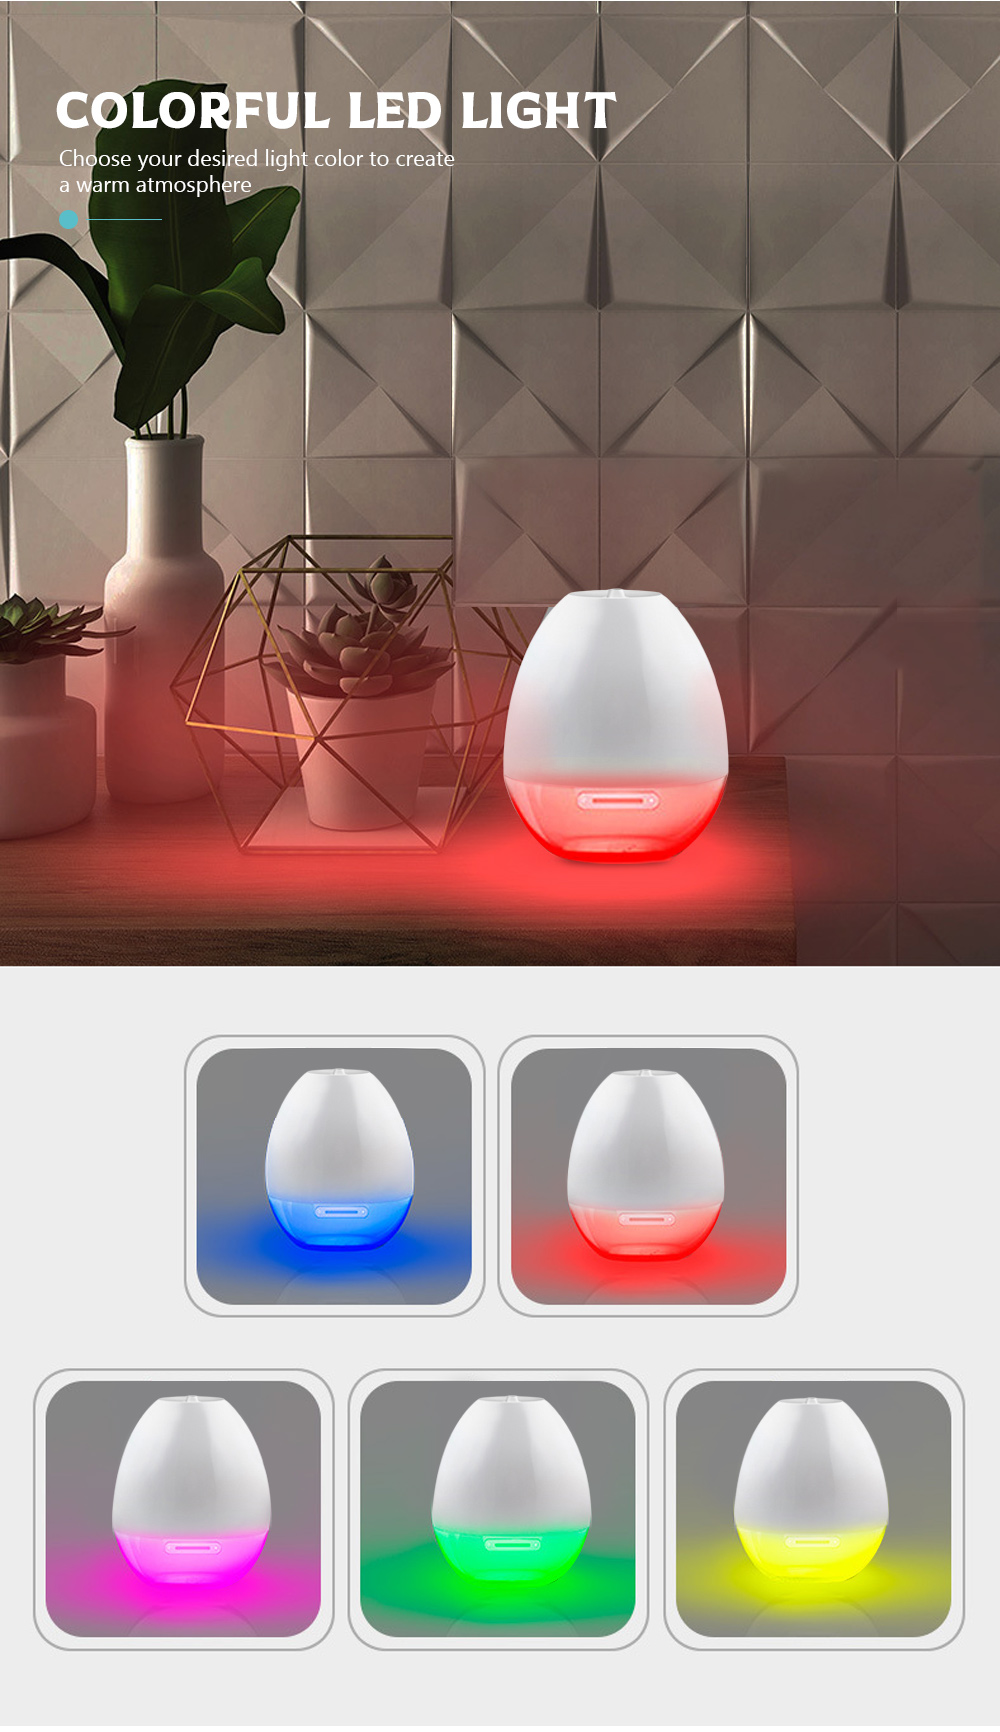 80ml Ultrasonic Aromatherapy Humidifier with Colorful LED Light for Bedroom / Office / Yoga Studio